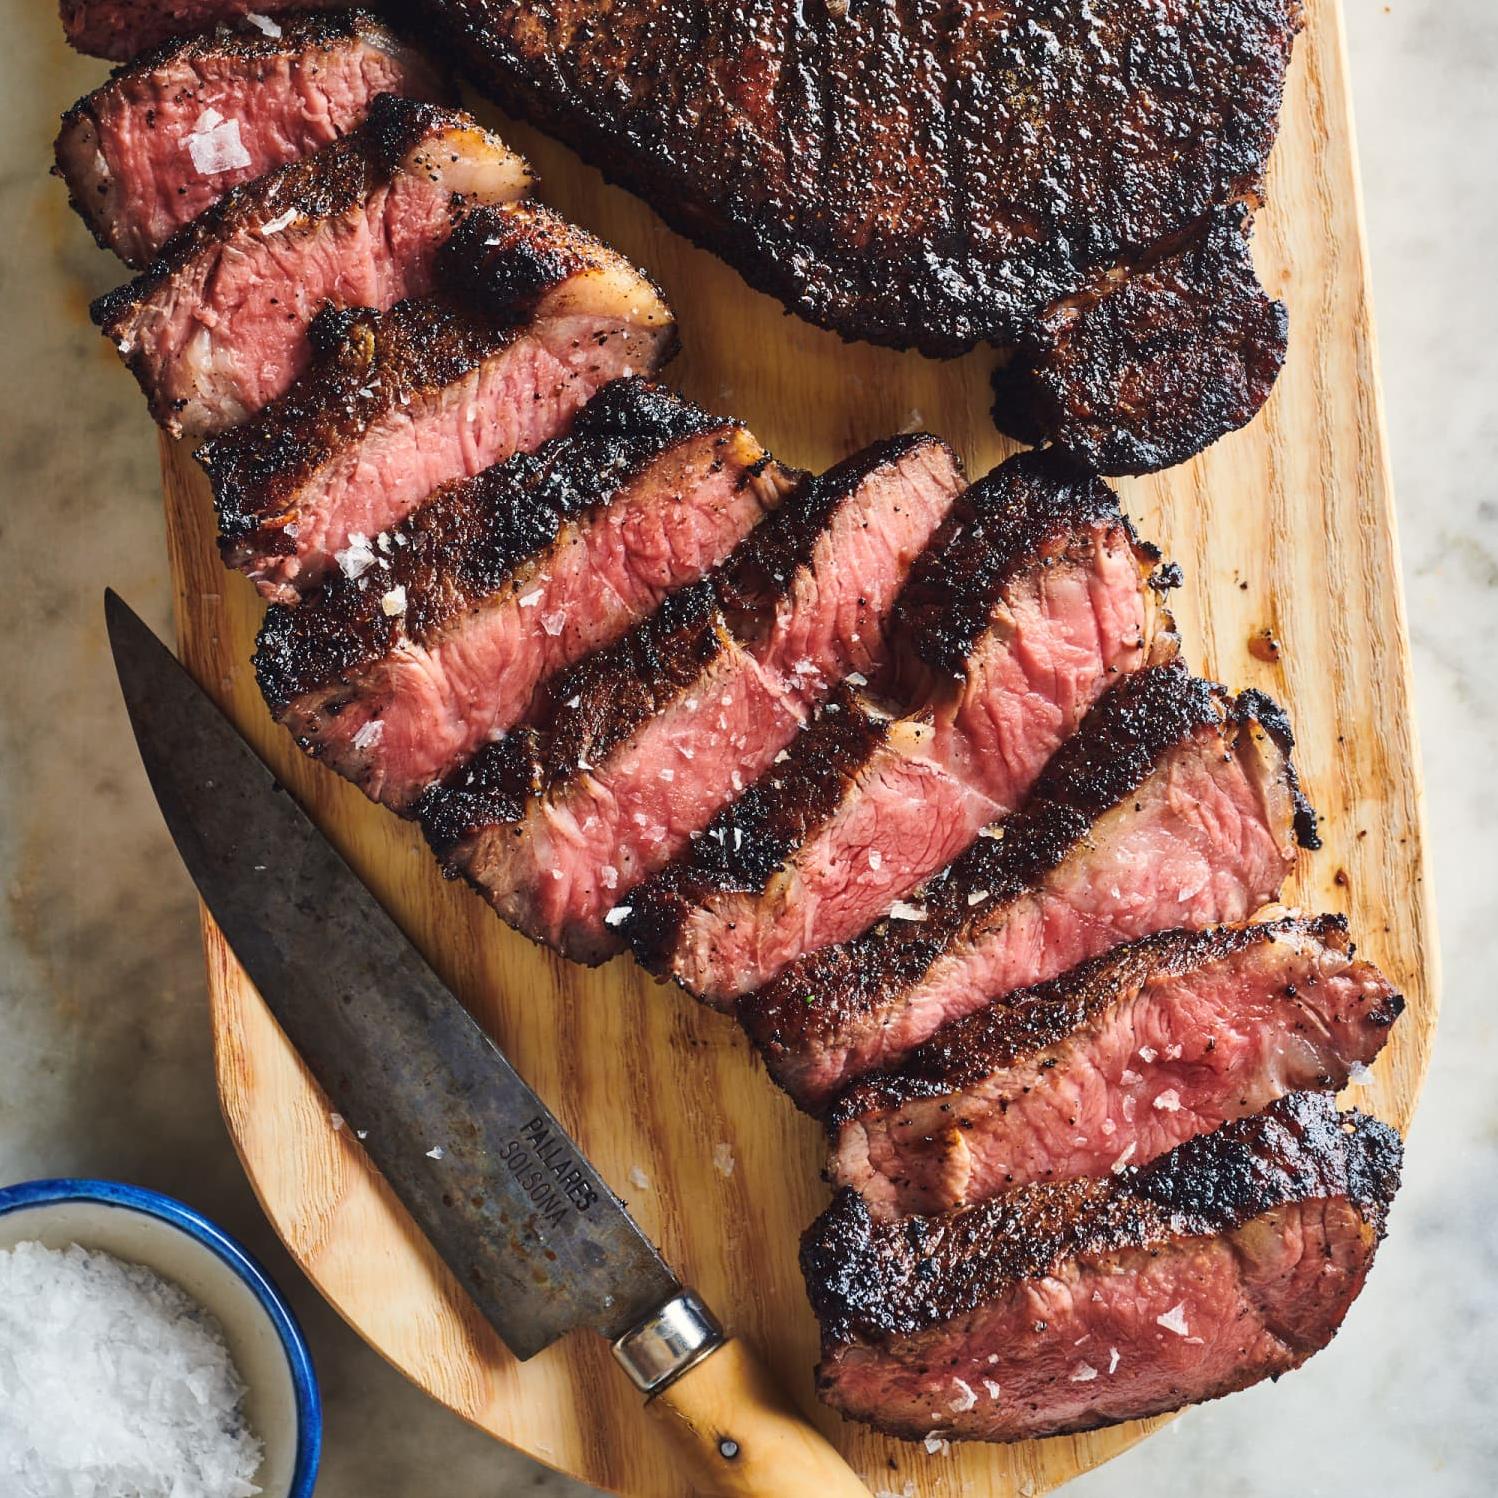  Here's an irresistible coffee rub recipe for your next steak dinner!